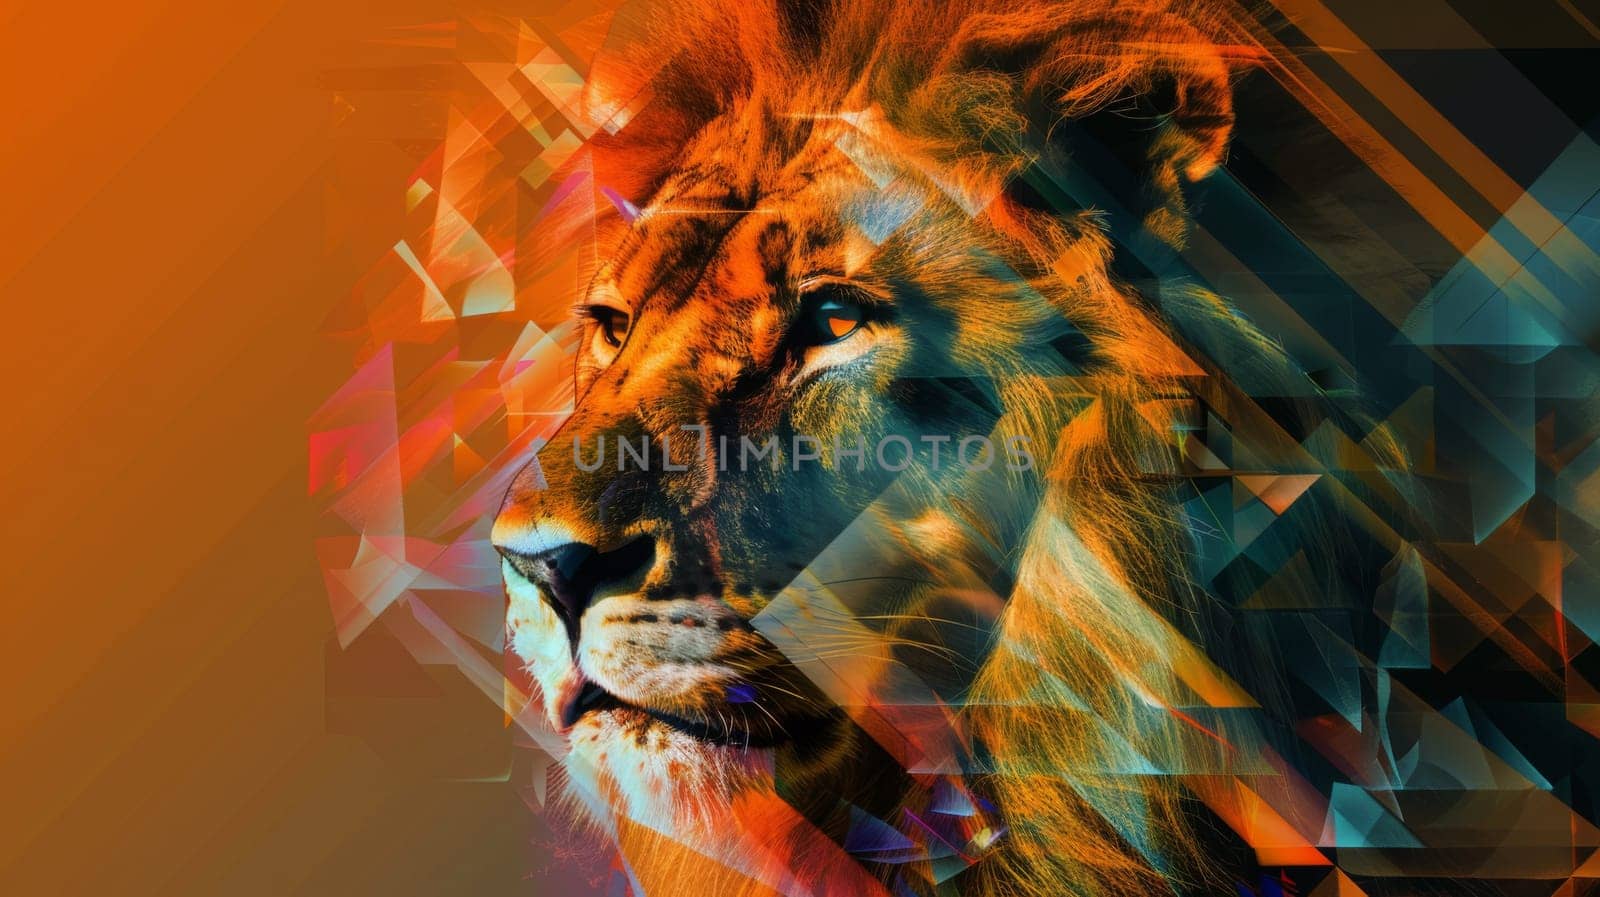 A lion is shown in a geometric pattern with orange and blue colors, AI by starush